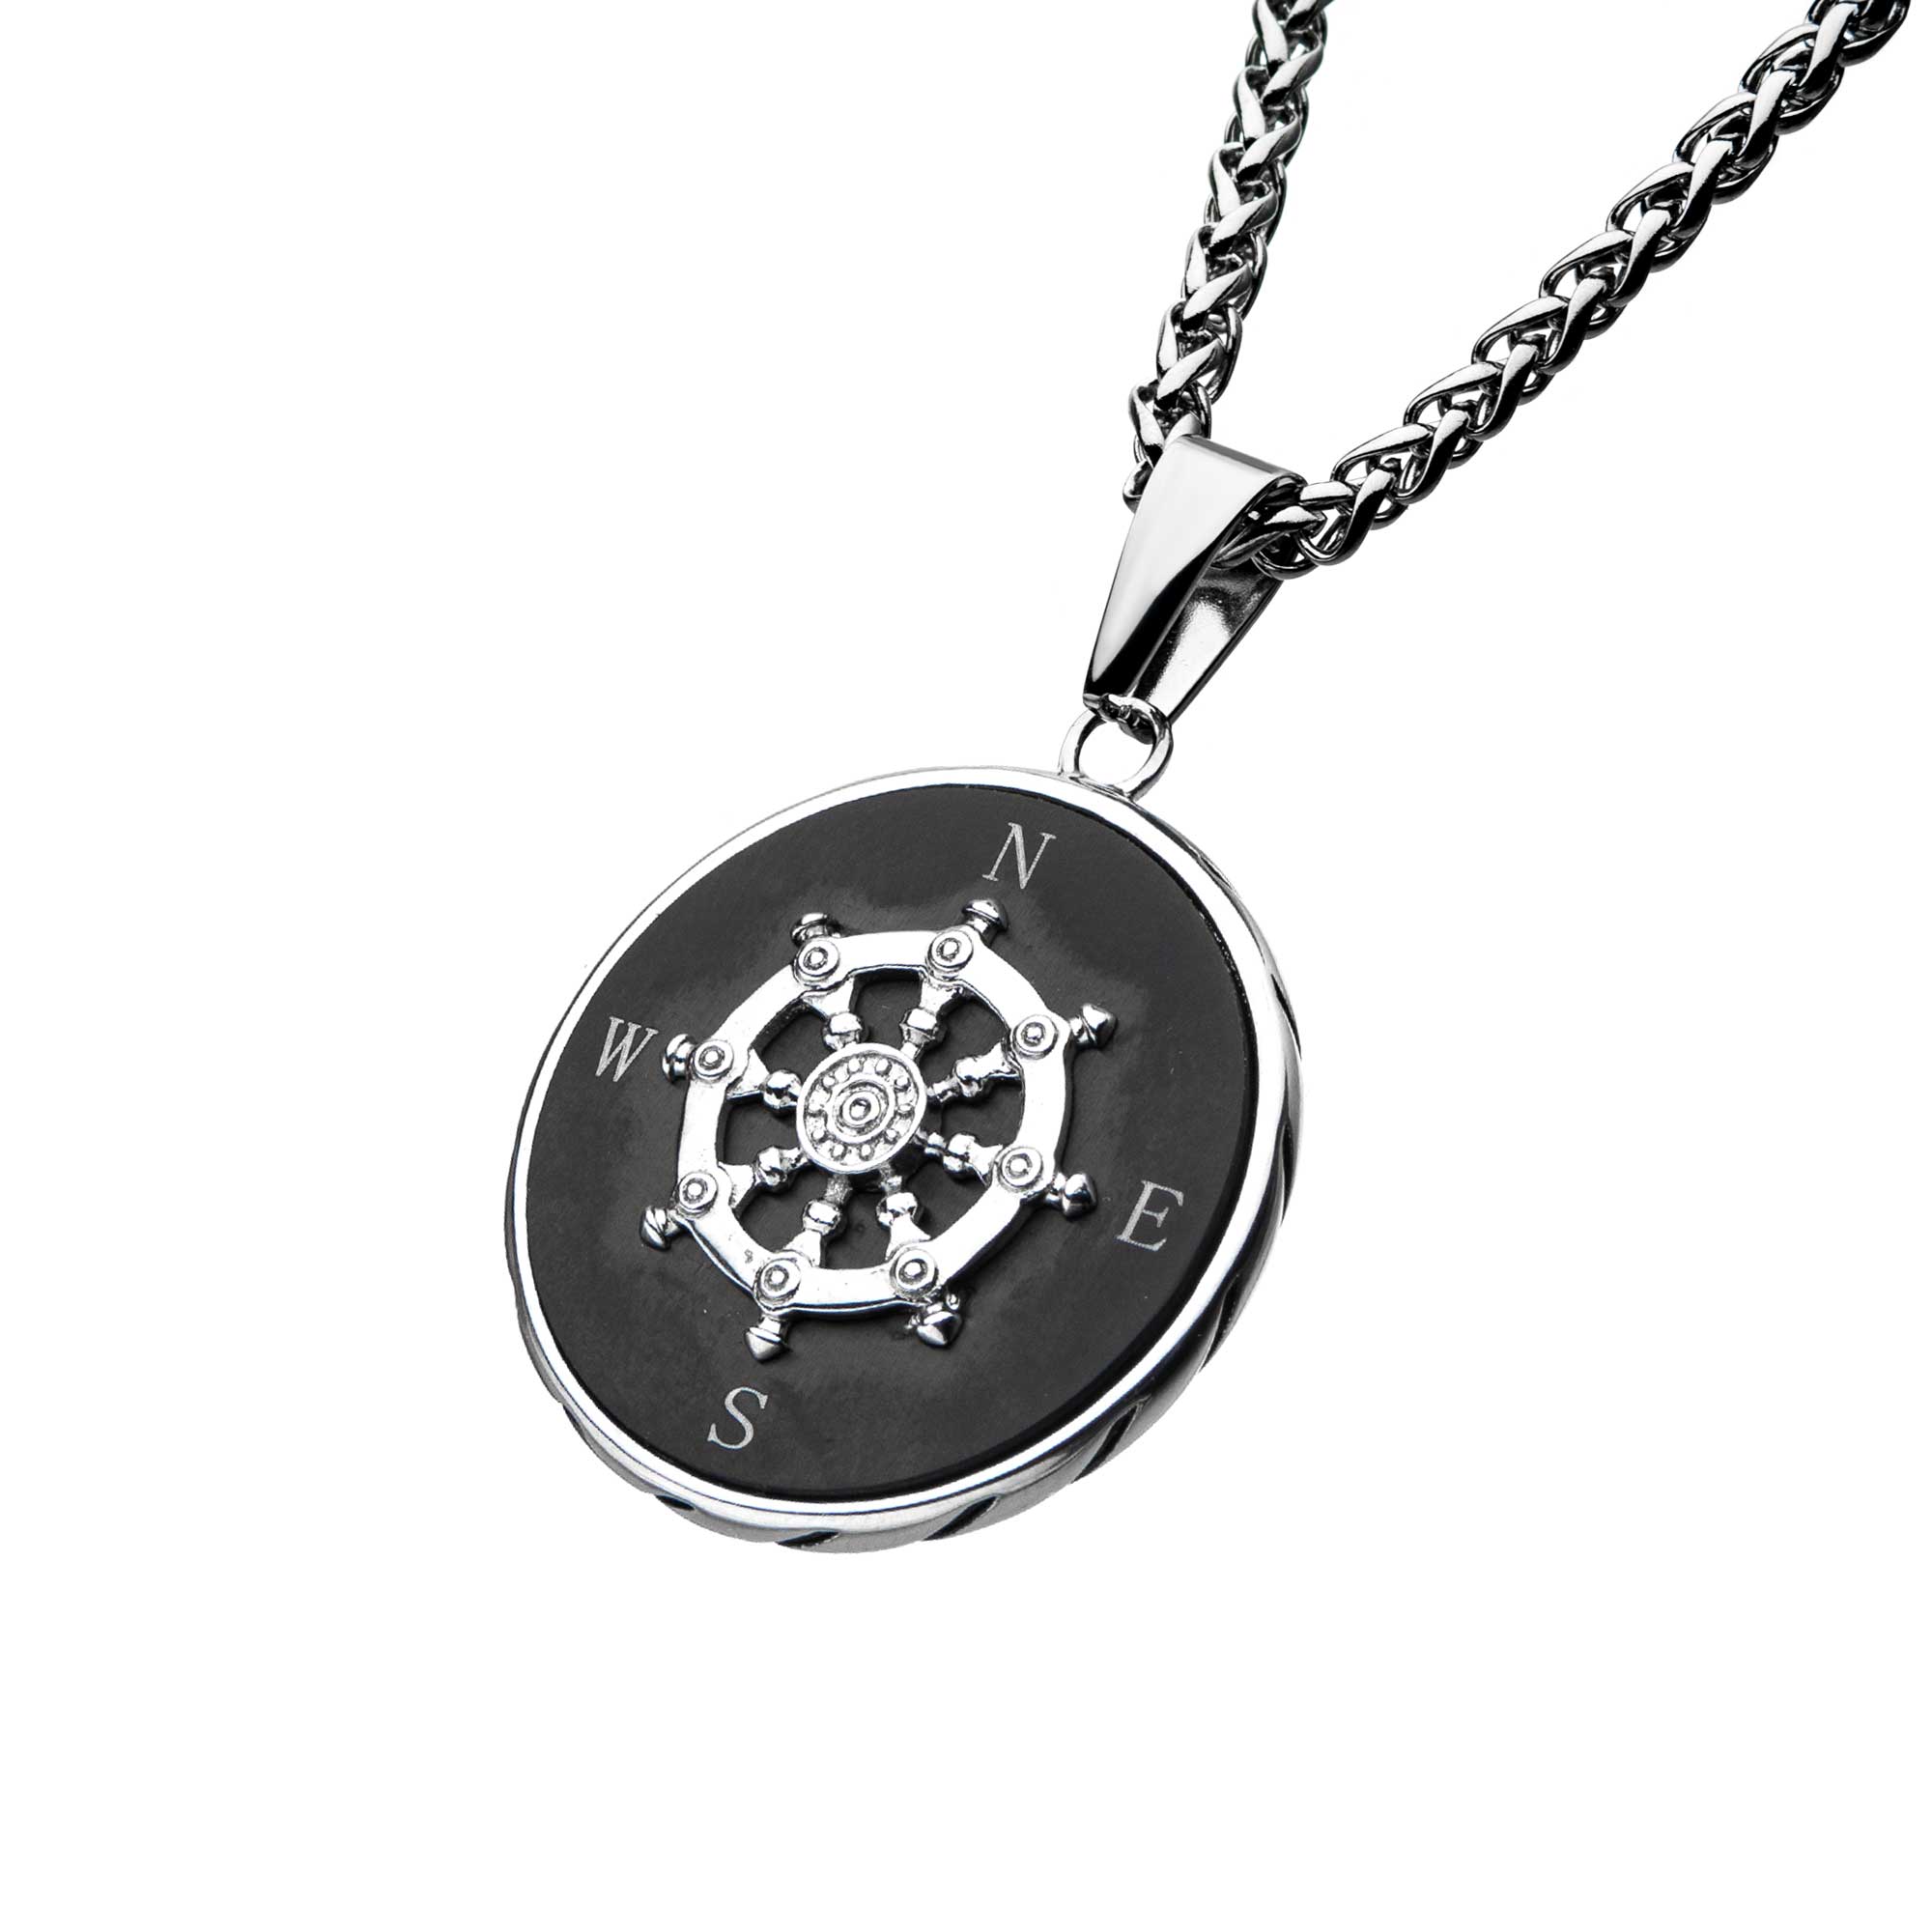 Stainless Steel Black Plated Ship's Wheel Compass Pendant with Chain Image 2 K. Martin Jeweler Dodge City, KS